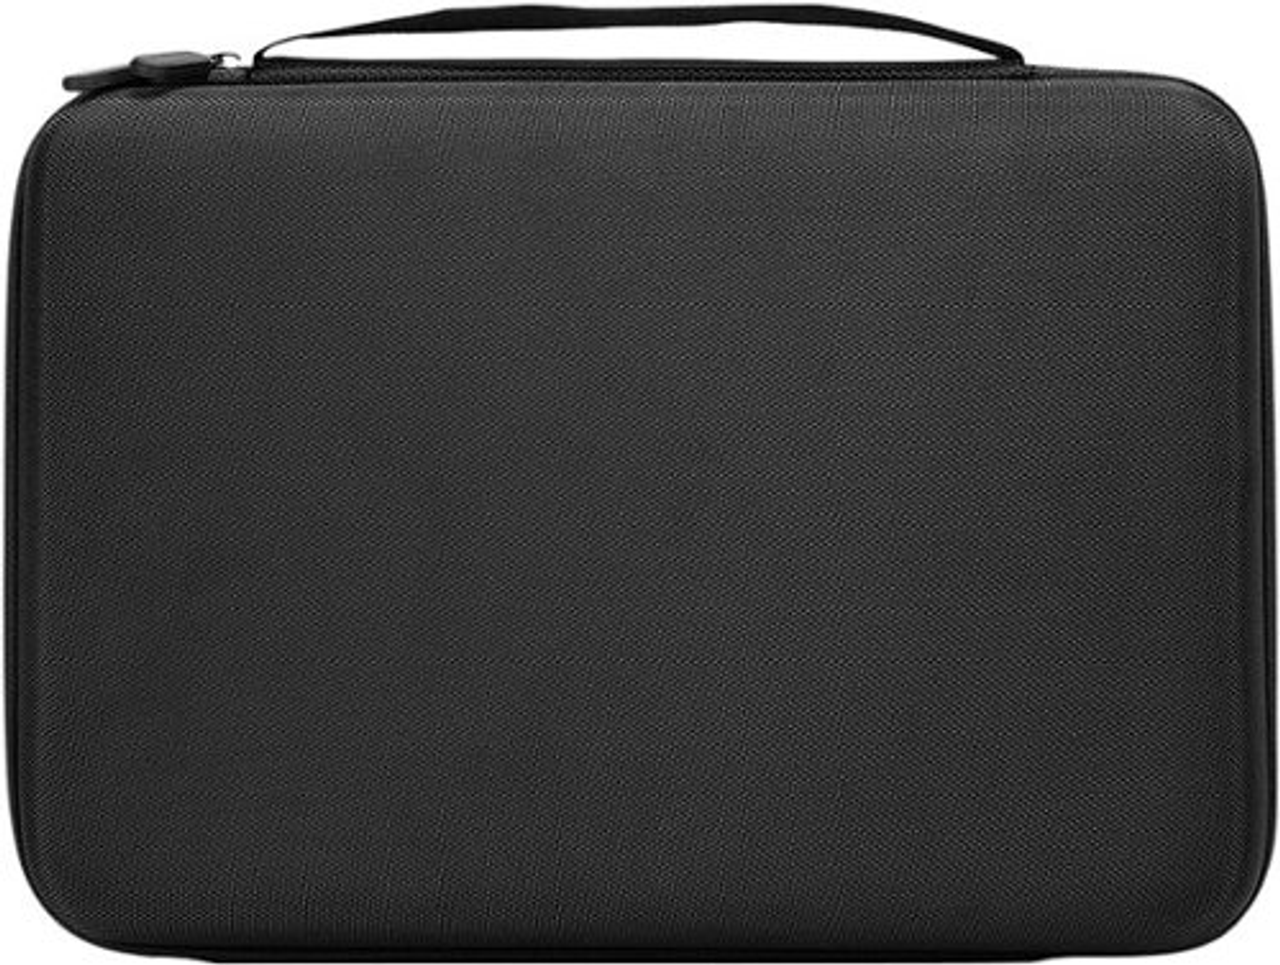 SaharaCase - Carry Case Organizer for Most Tablets up to 13" - Black